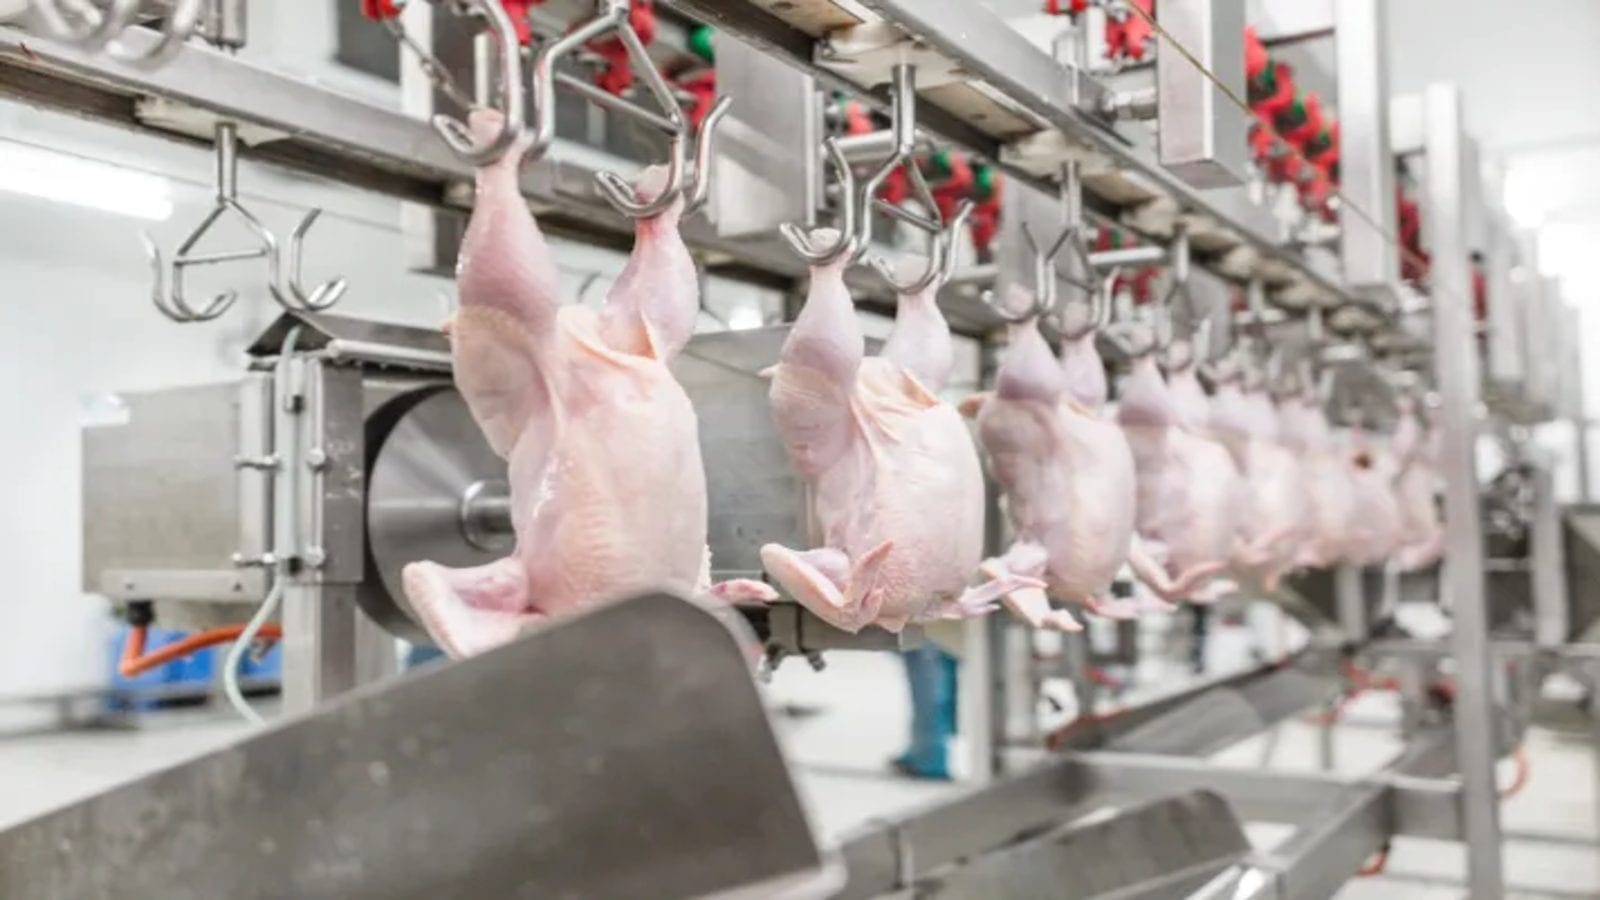 USDA forecasts Poultry production in Brazil to increase to 14.8 million tonnes in 2023